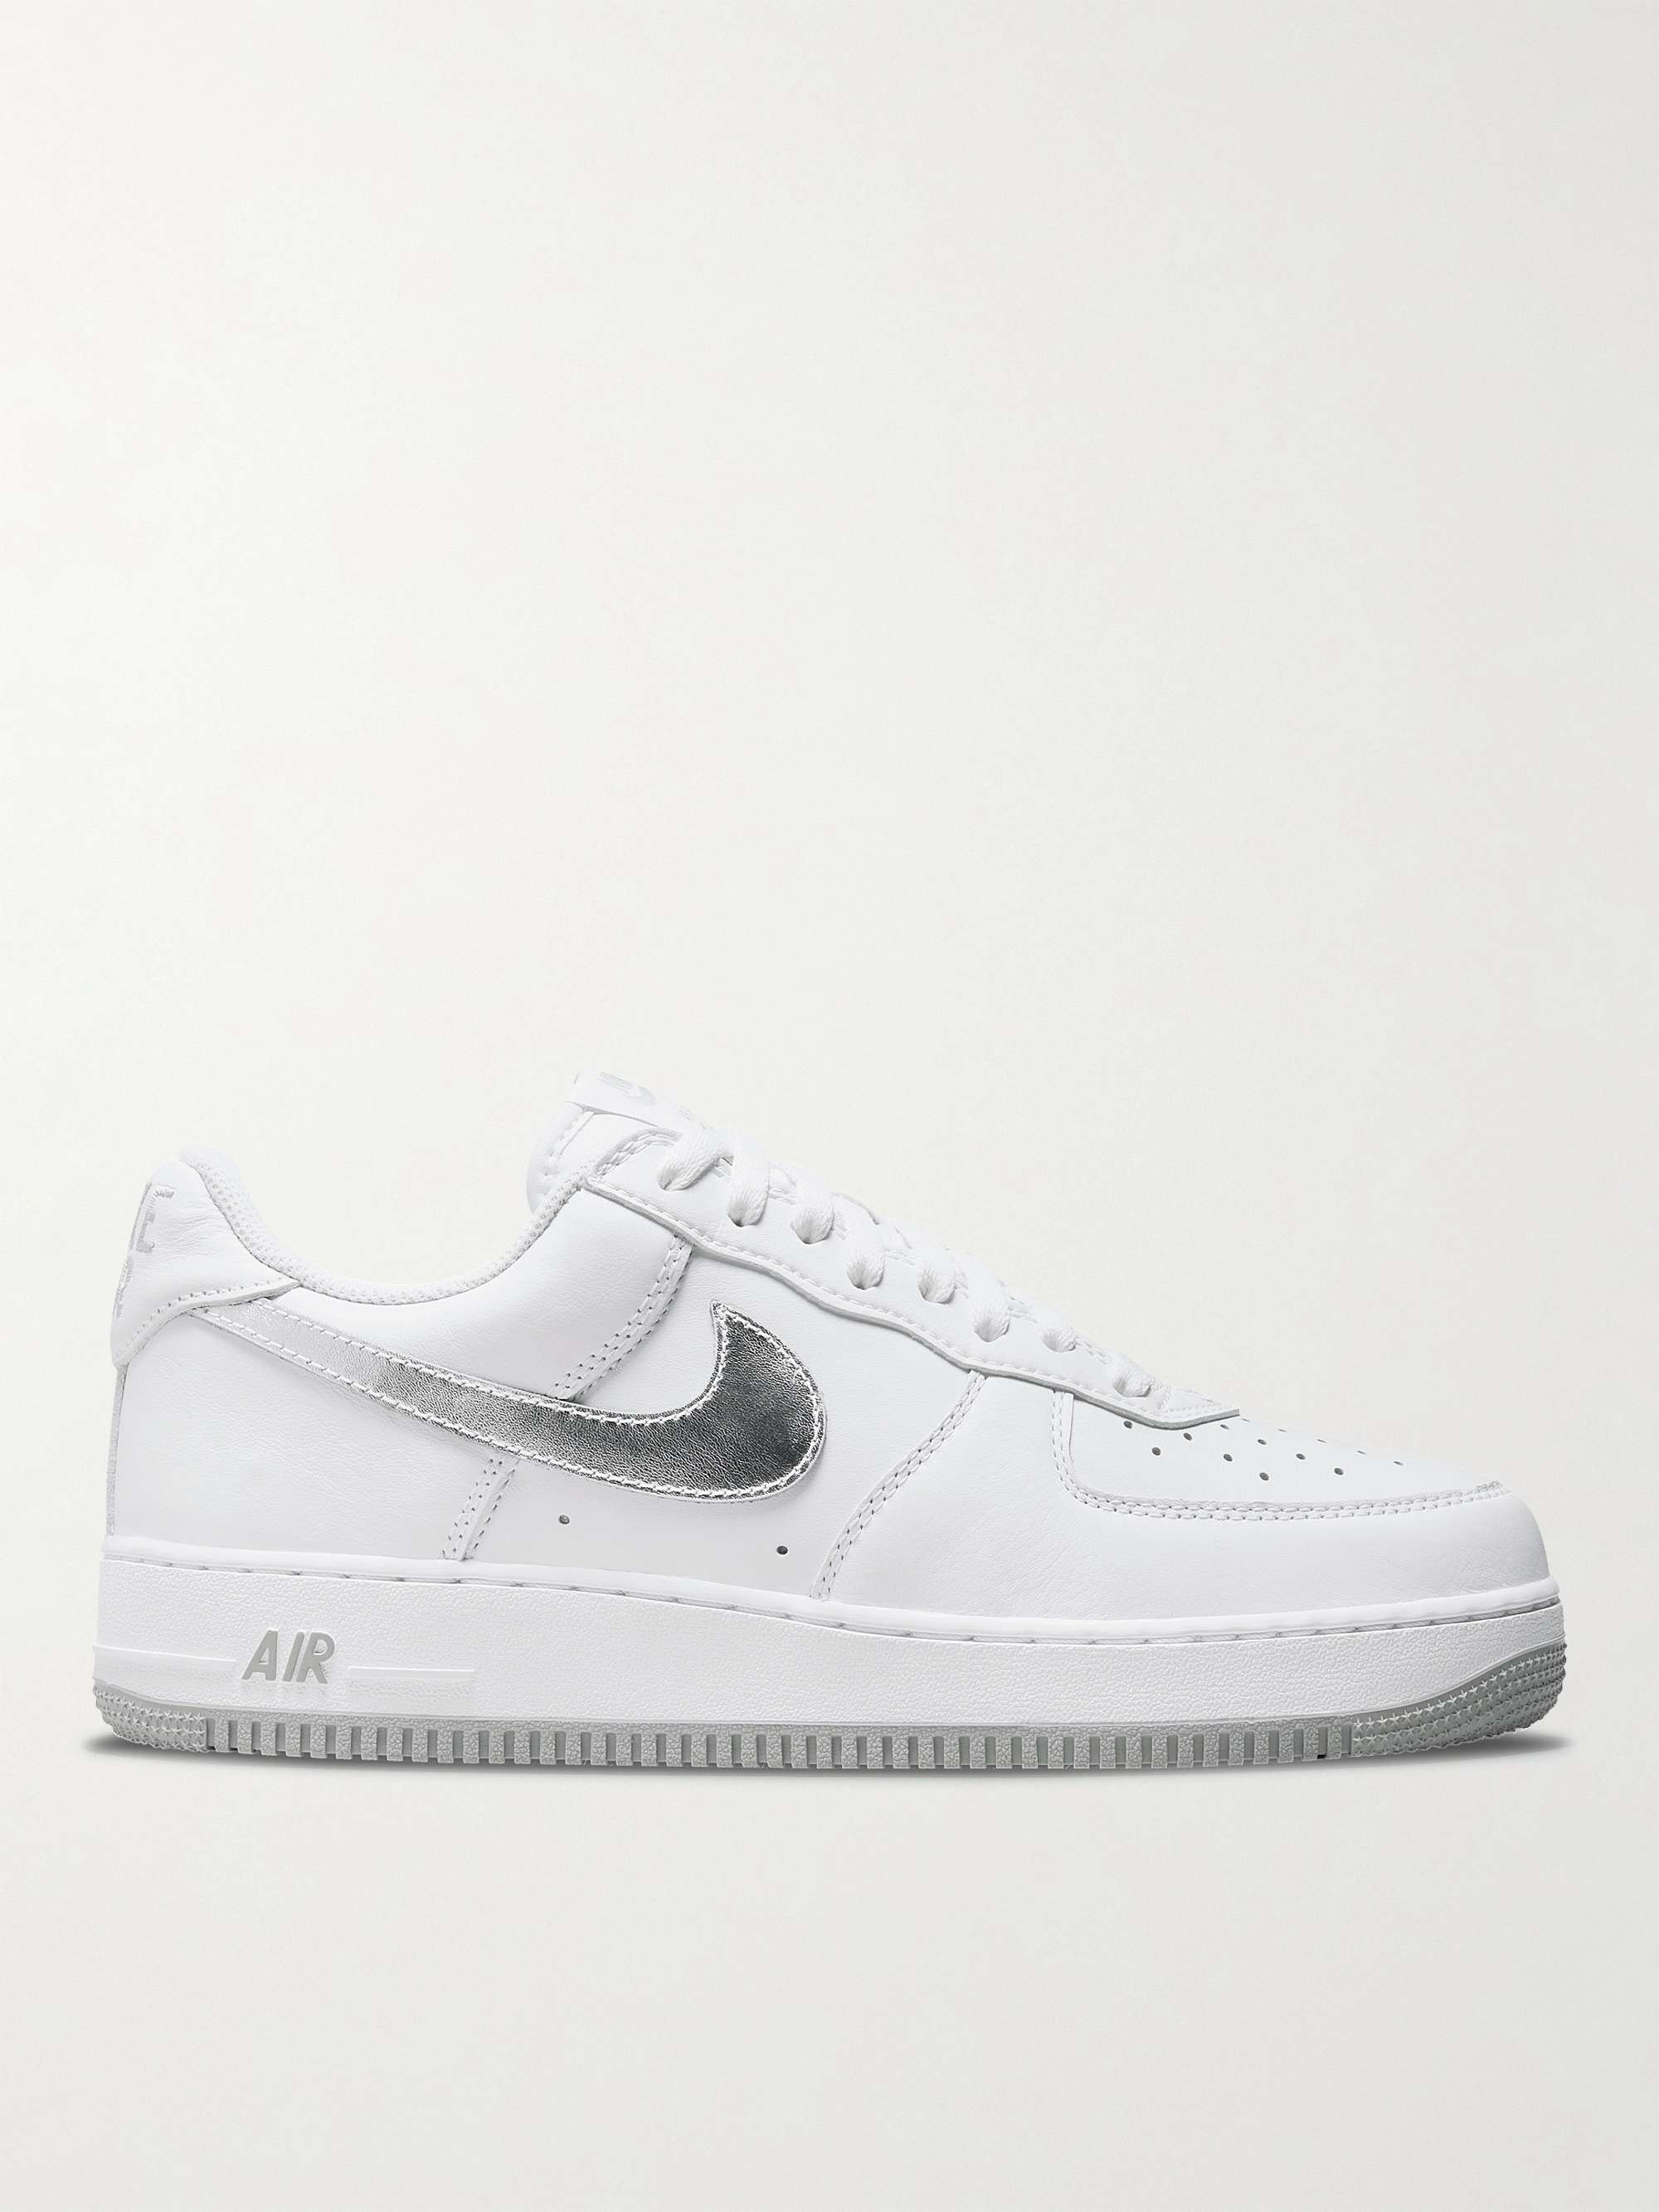 NIKE Air Force 1 Low Retro Leather Sneakers | MR PORTER